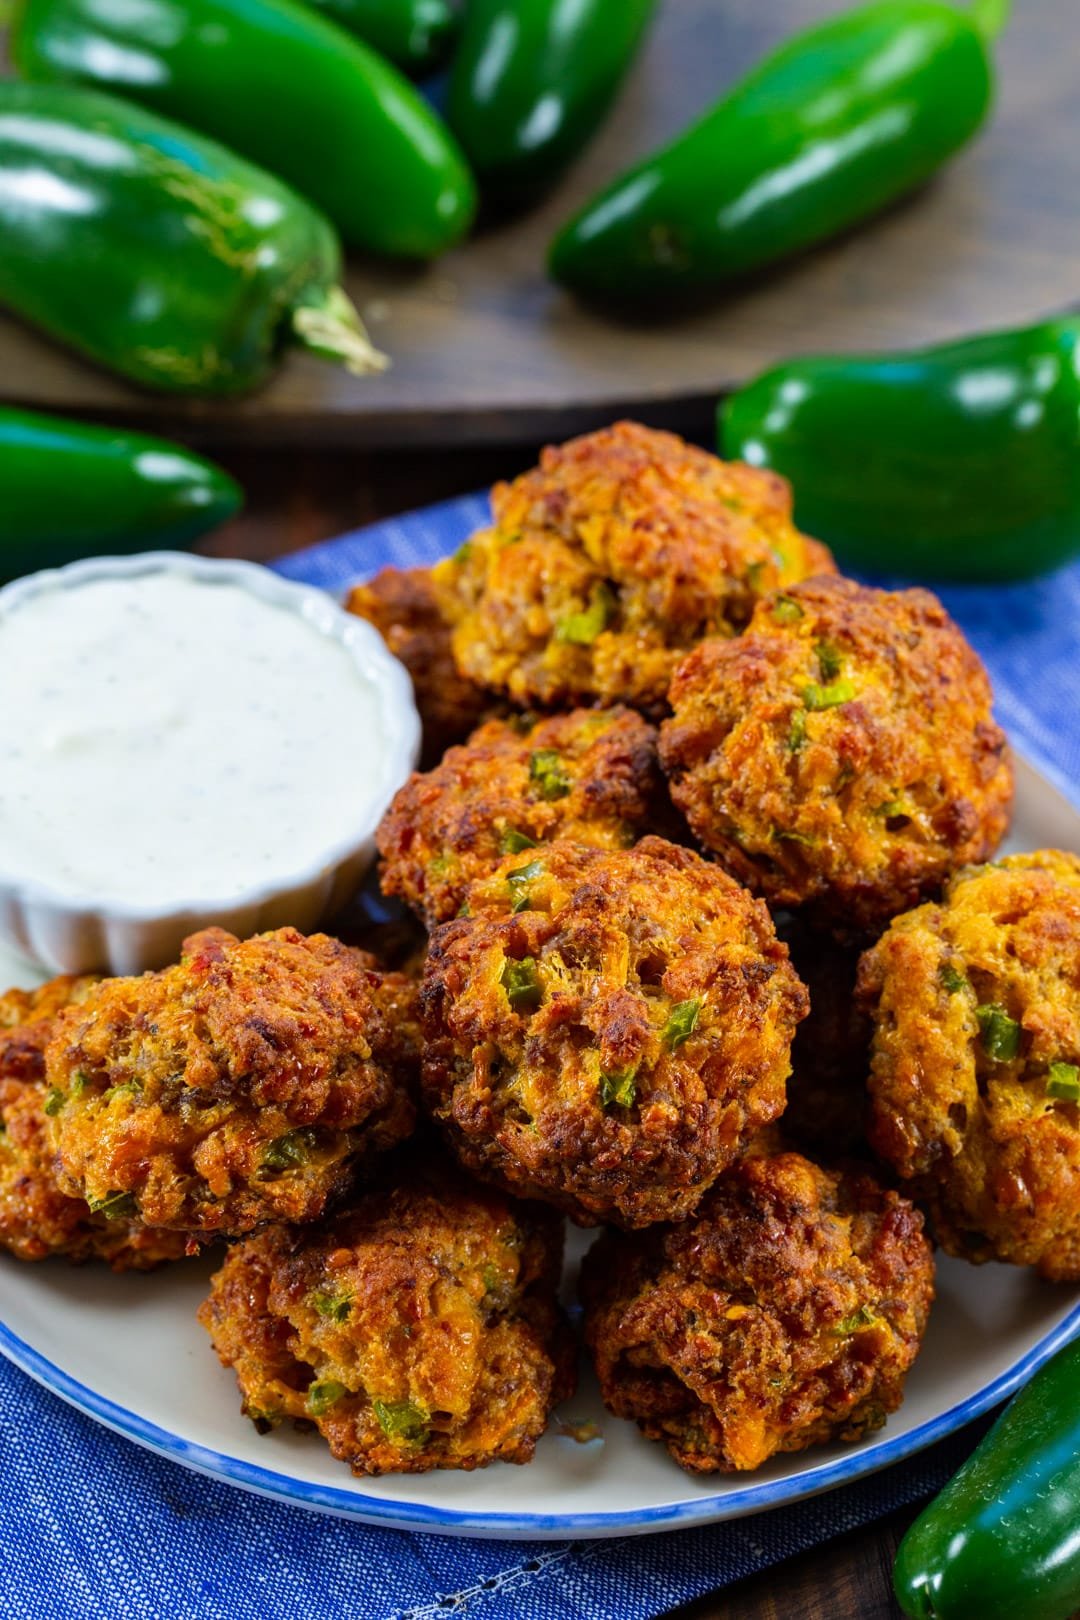 Sausage Balls on a plate surrounded by jalapenos.